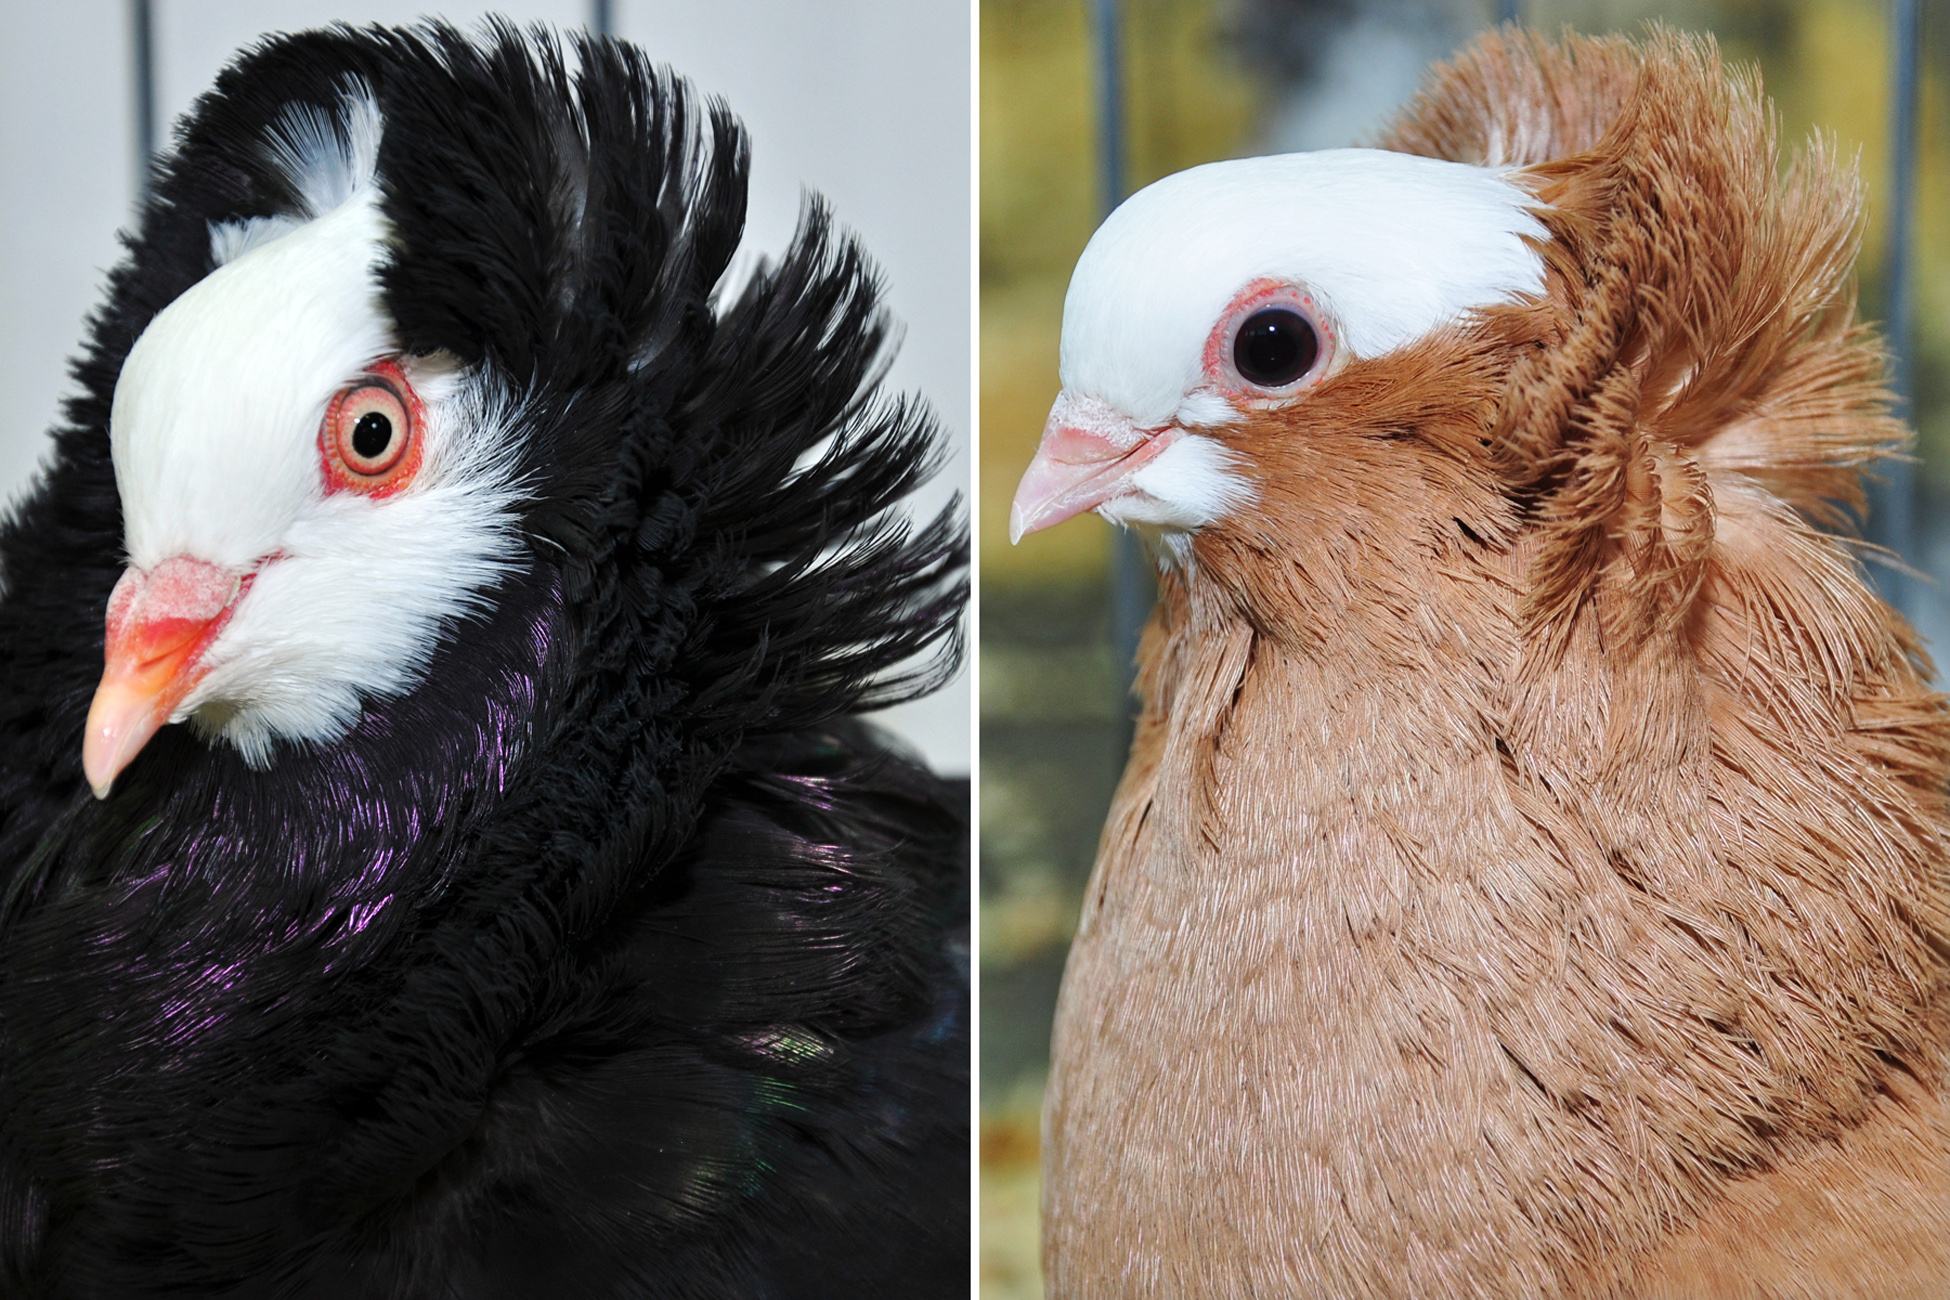 These two pigeon breeds -- the old Dutch capuchine, left, and komorner tumbler, right -- are not closely related, let they both have feathery ornamentation on their heads known as a head crest. These pigeons illustrate the notion that birds of a feather don't always stick together, at least genetically, according to a new University of Utah study of the pigeon family tree.